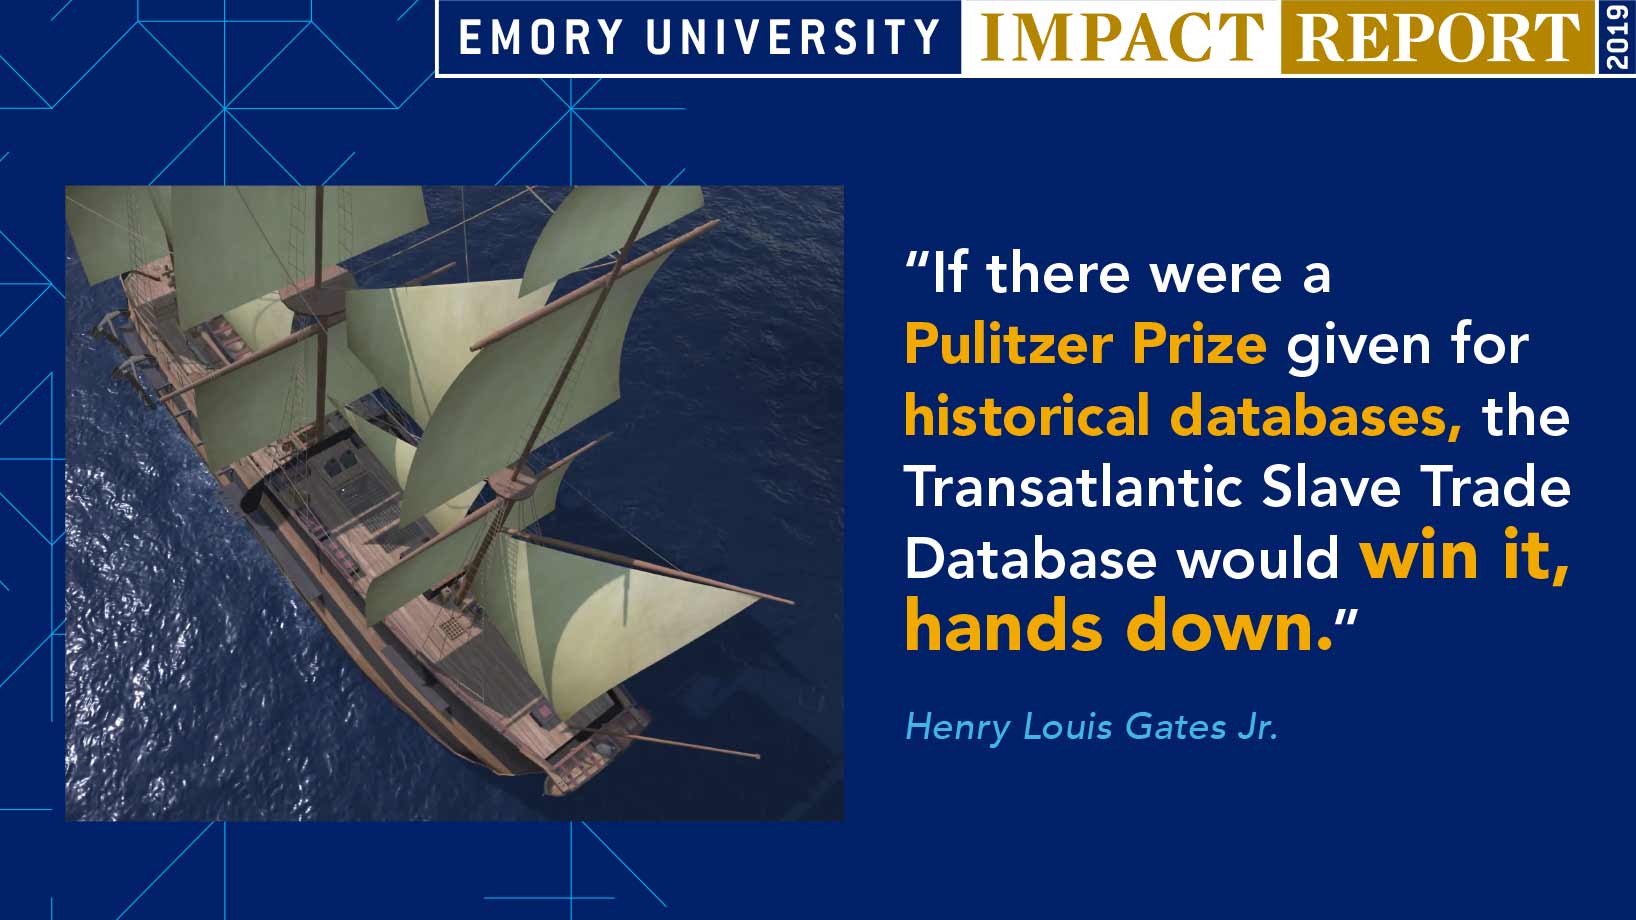 “If there were a Pulitzer Prize given for historical databases, the Transatlantic Slave Trade Database would win it, hands down.” Henry Louis Gates Jr.